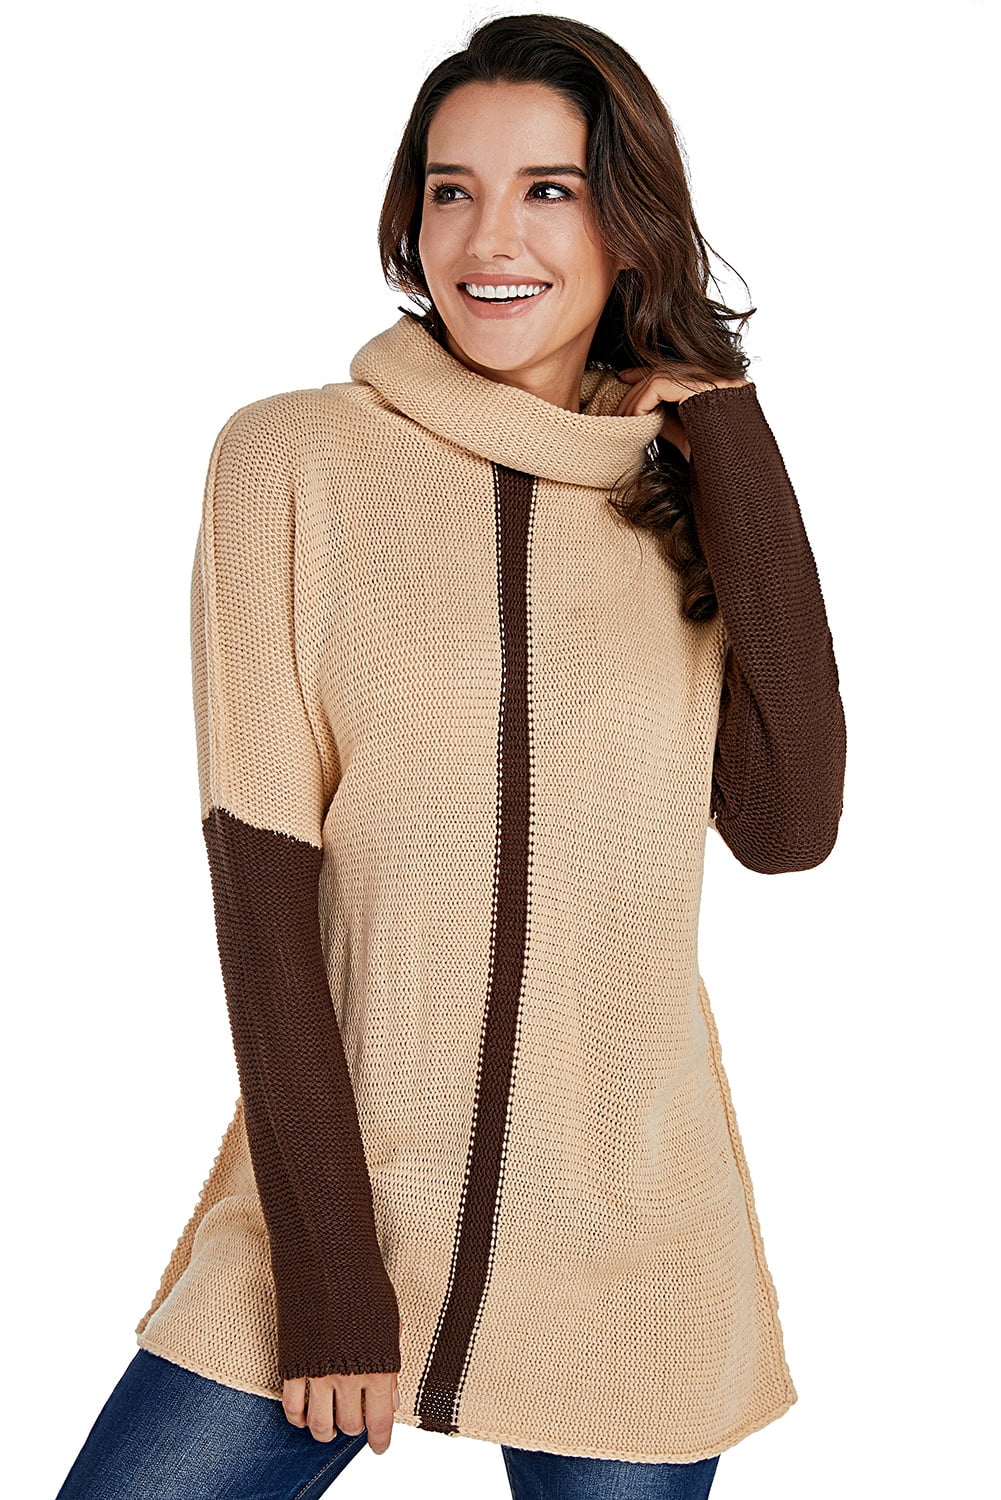 Brown Apricot Individual Cowl Neck Pullover Sweater | Walmart Canada